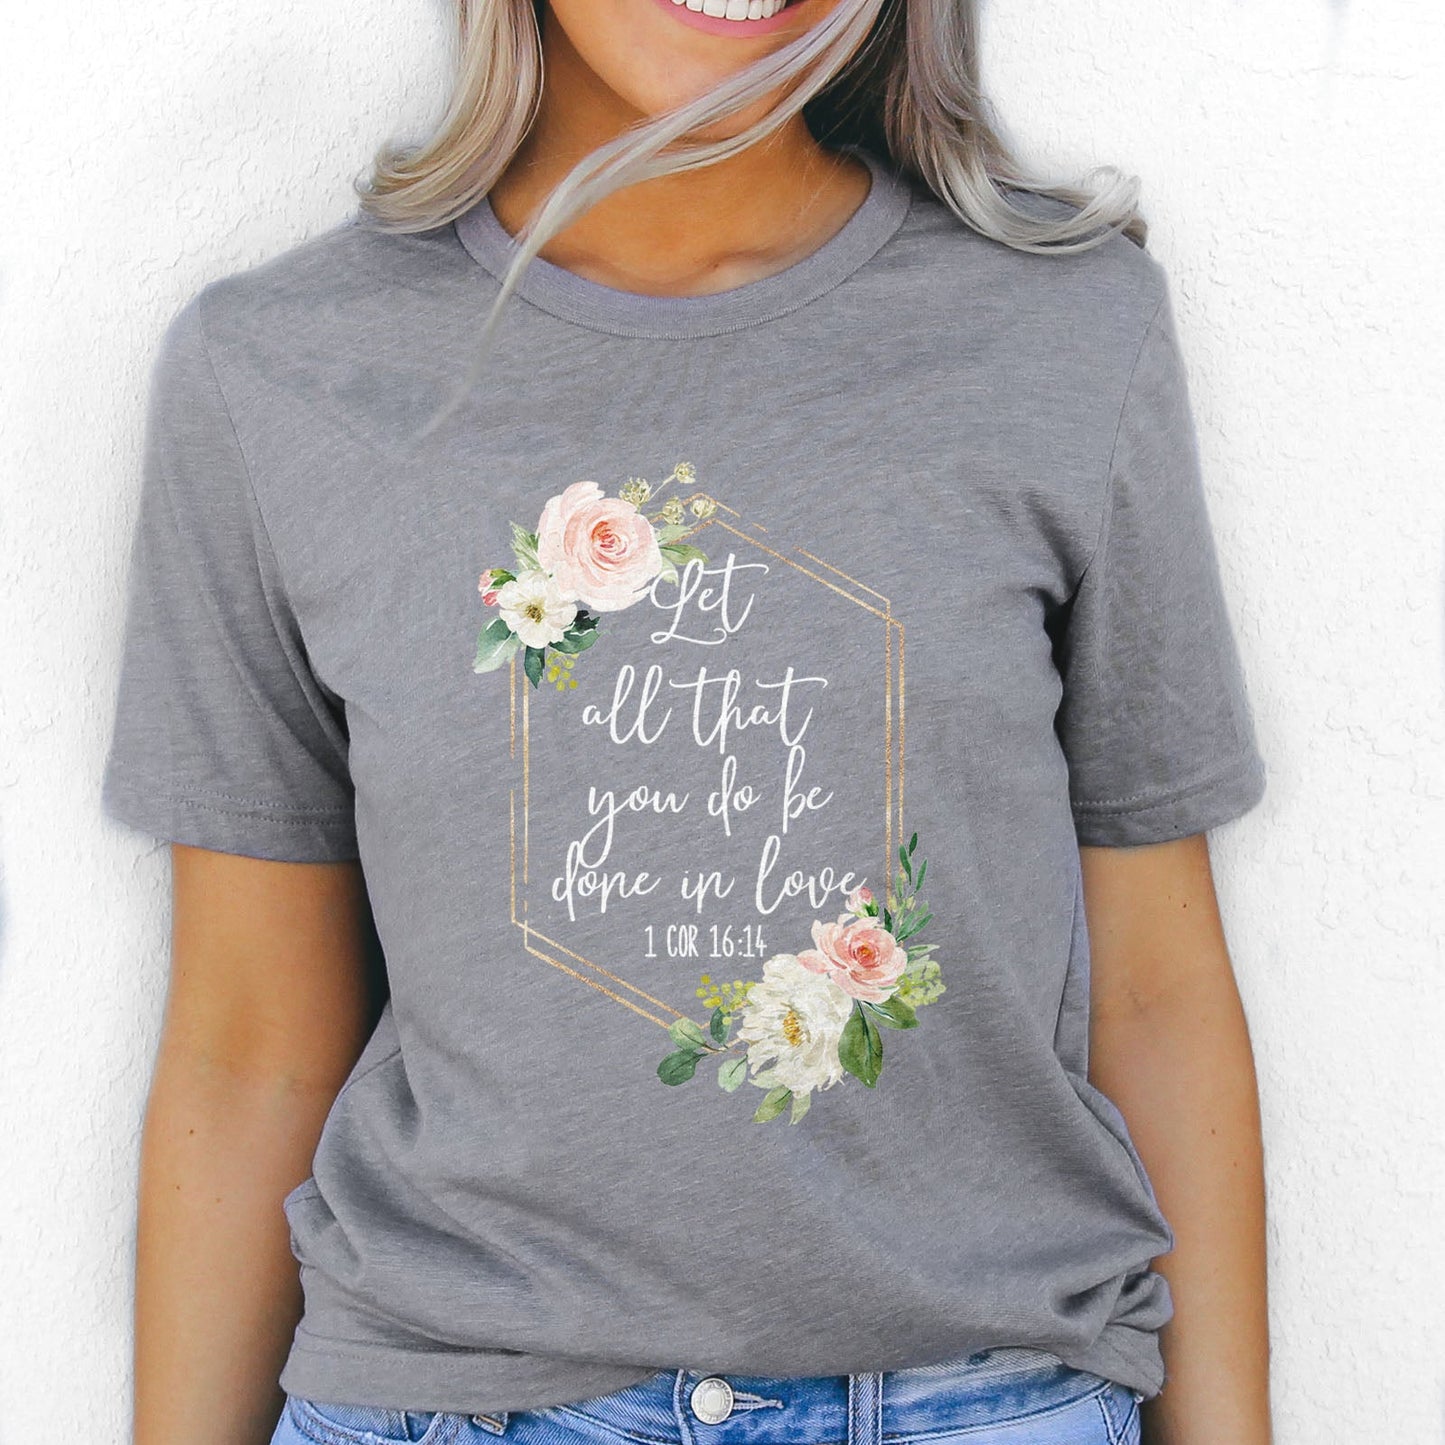 Let All That You Do Be Done With Love 1 Corinthians 16:14 Floral Glitter Tee Shirts For Women - Christian Shirts for Women 